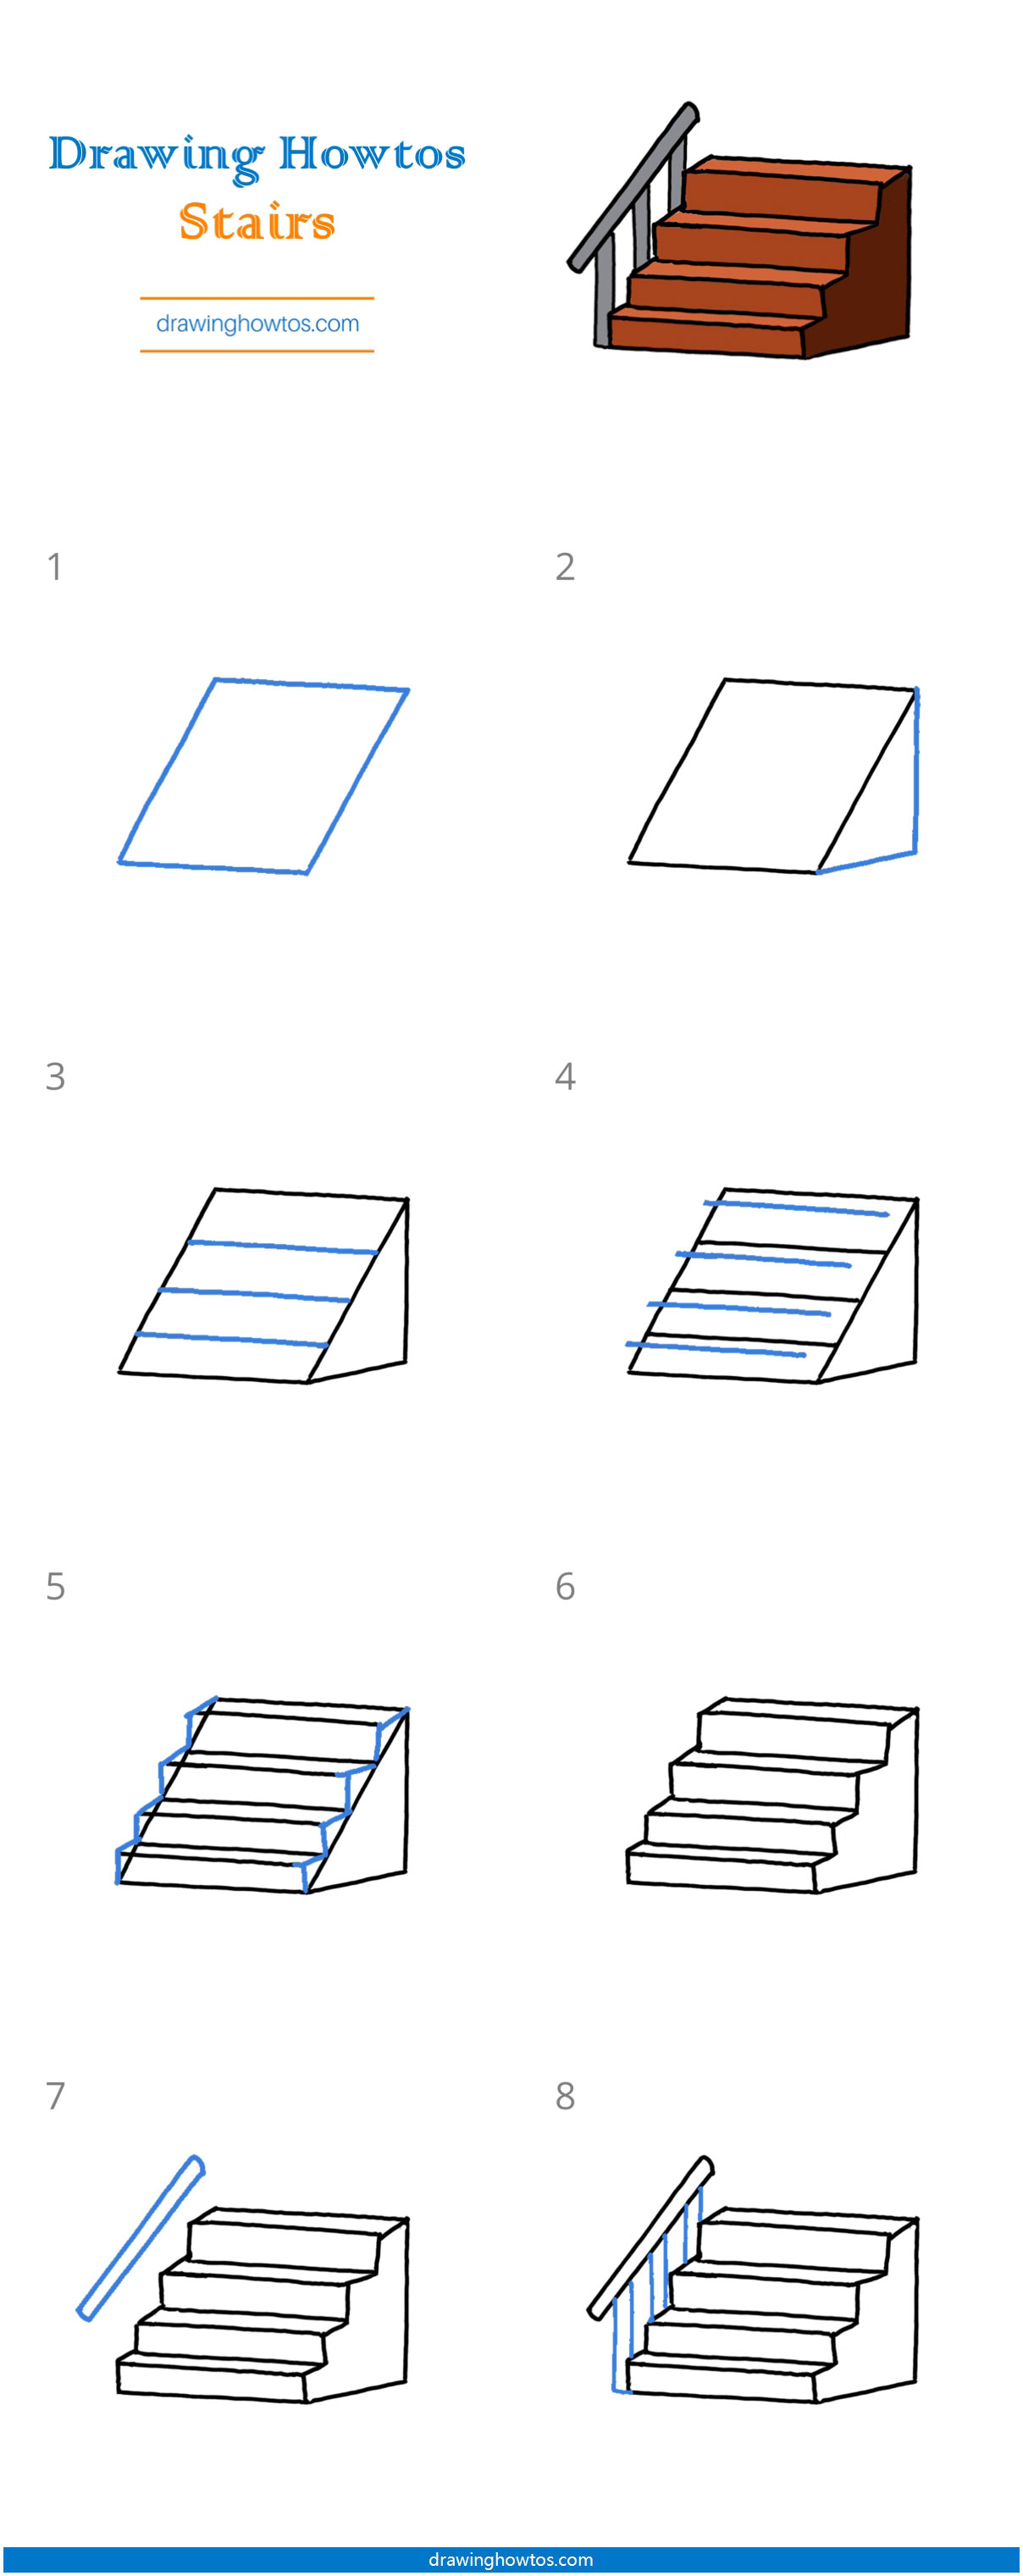 How to Draw Stairs Step by Step